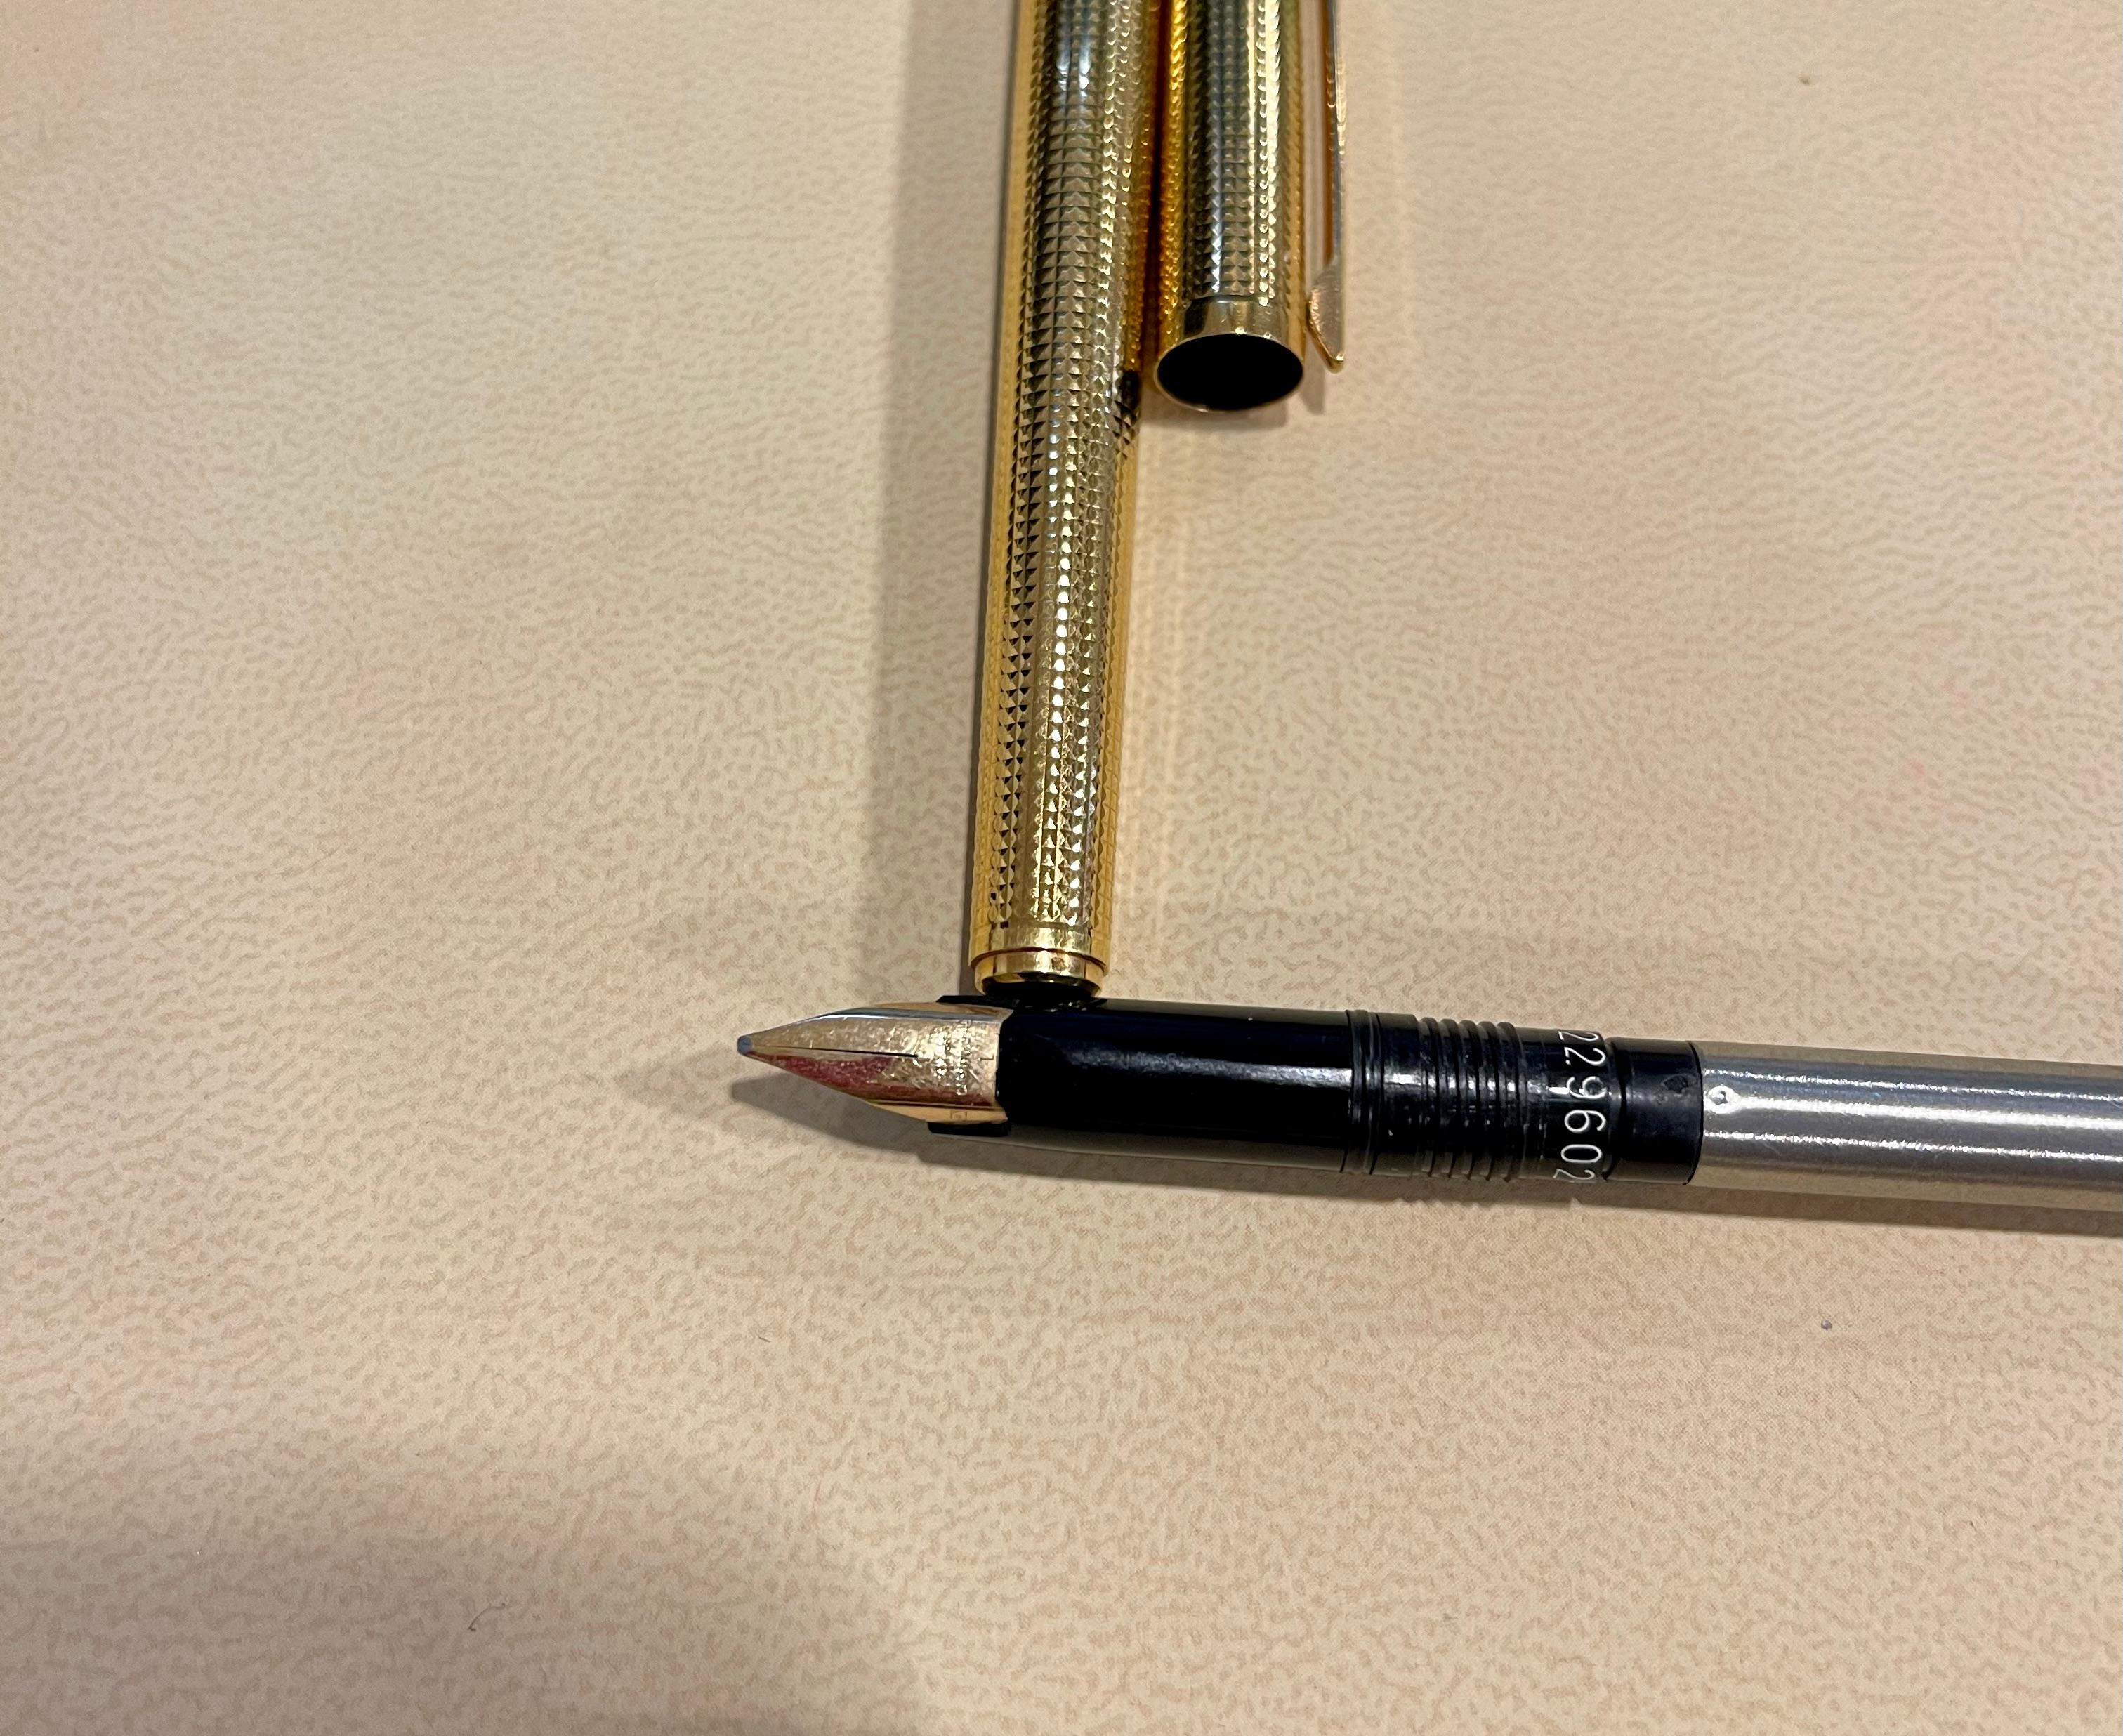 Caran d'Ache Fountain Pen Of Prestige Gold Plated Made in Switzerland 6